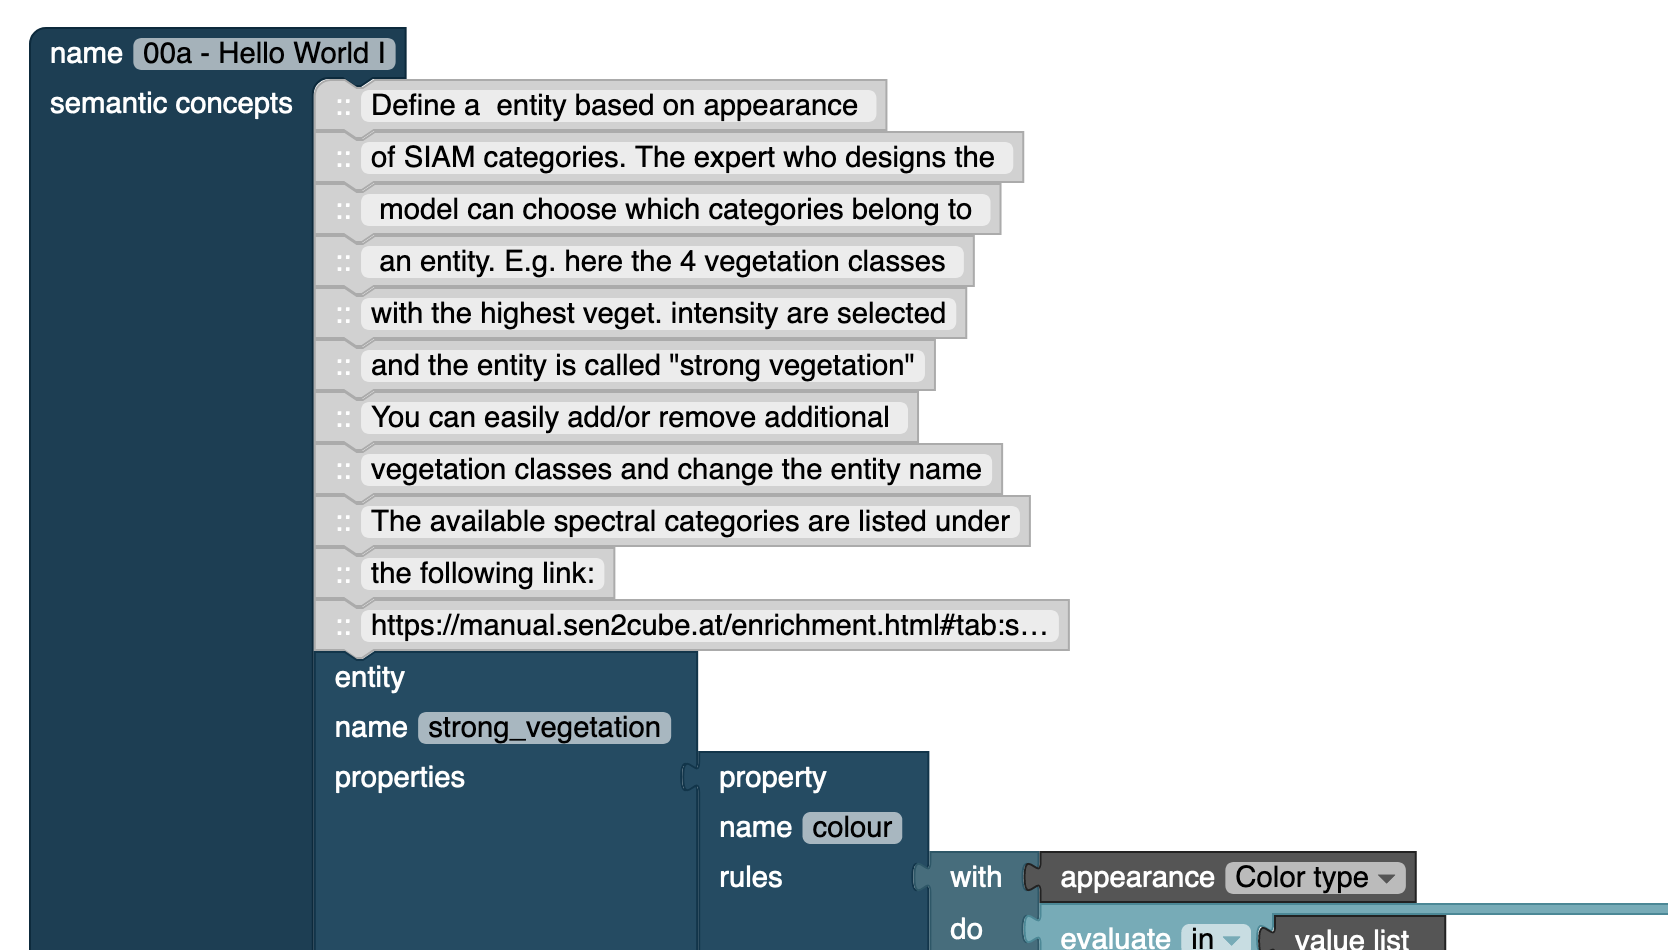 Example of concatenating several comment blocks to describe a model workflow